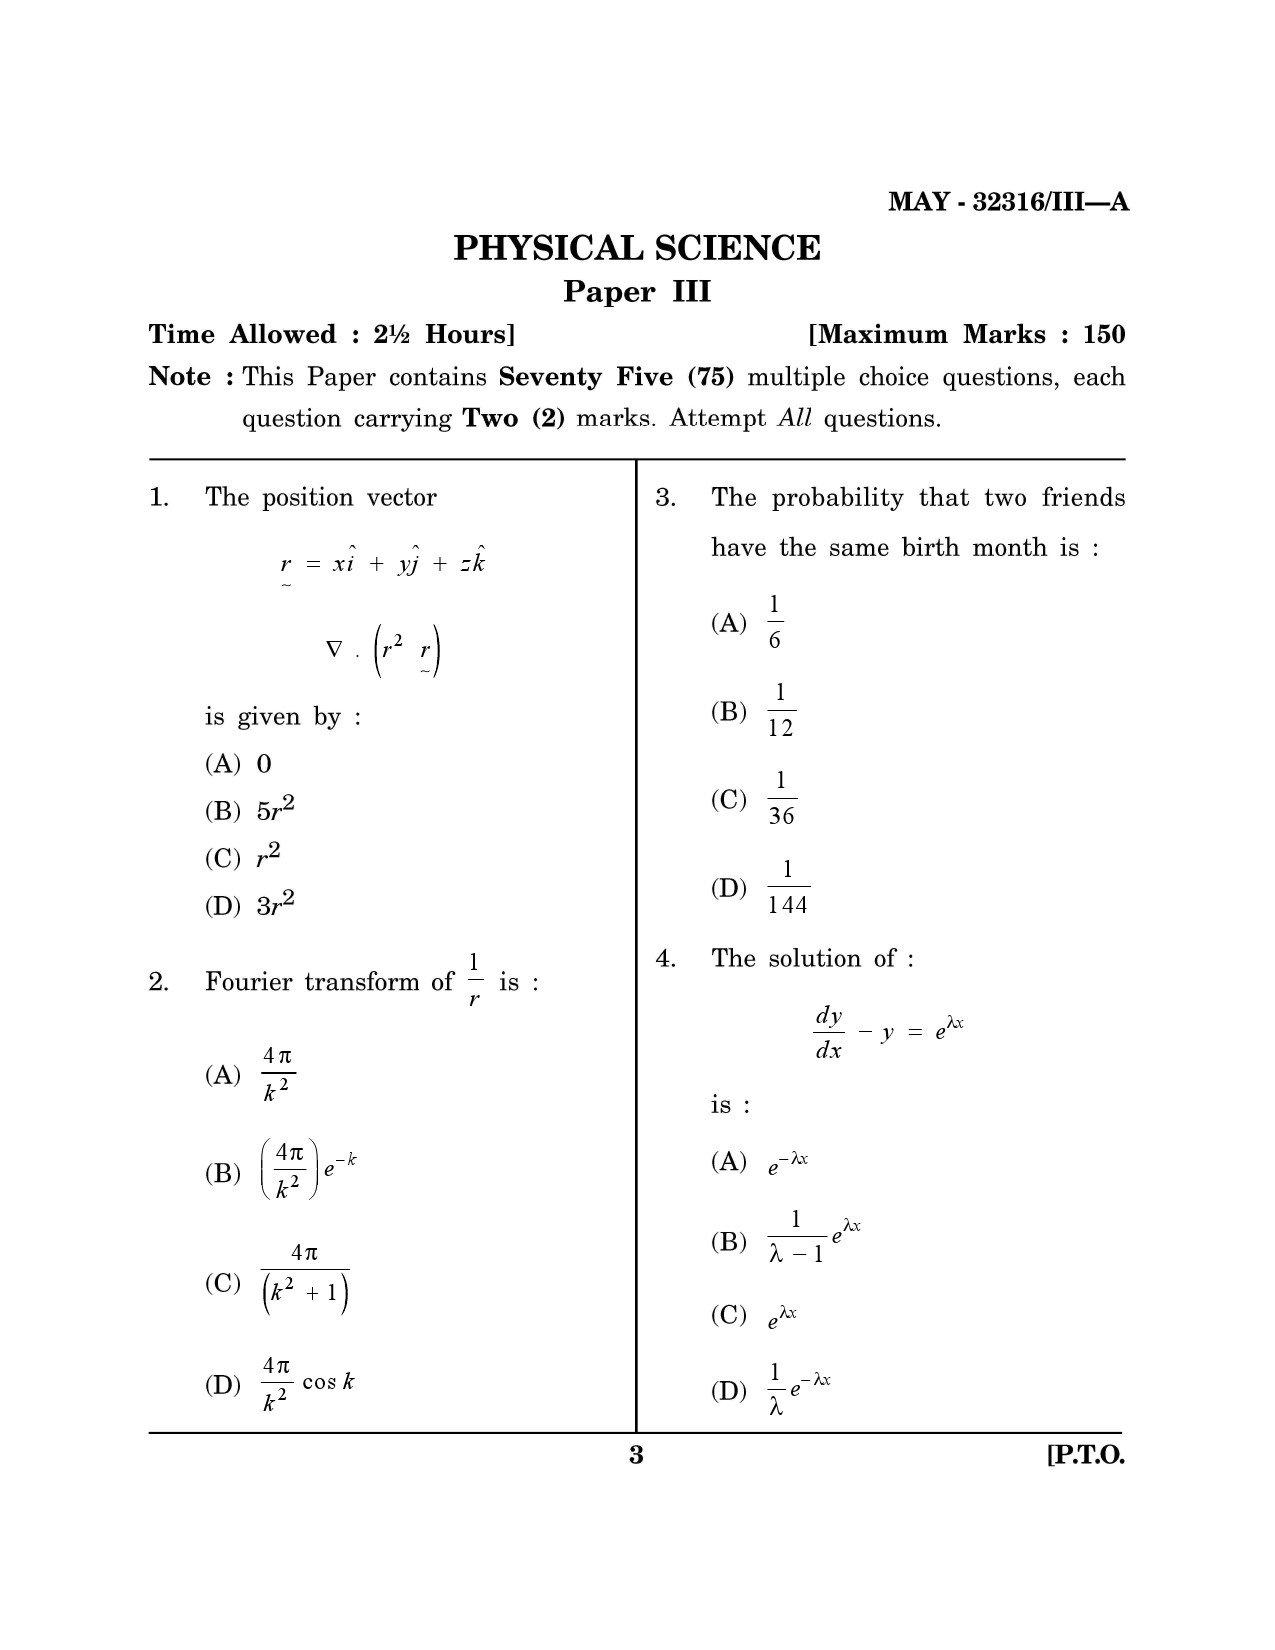 Maharashtra SET Physical Science Question Paper III May 2016 2